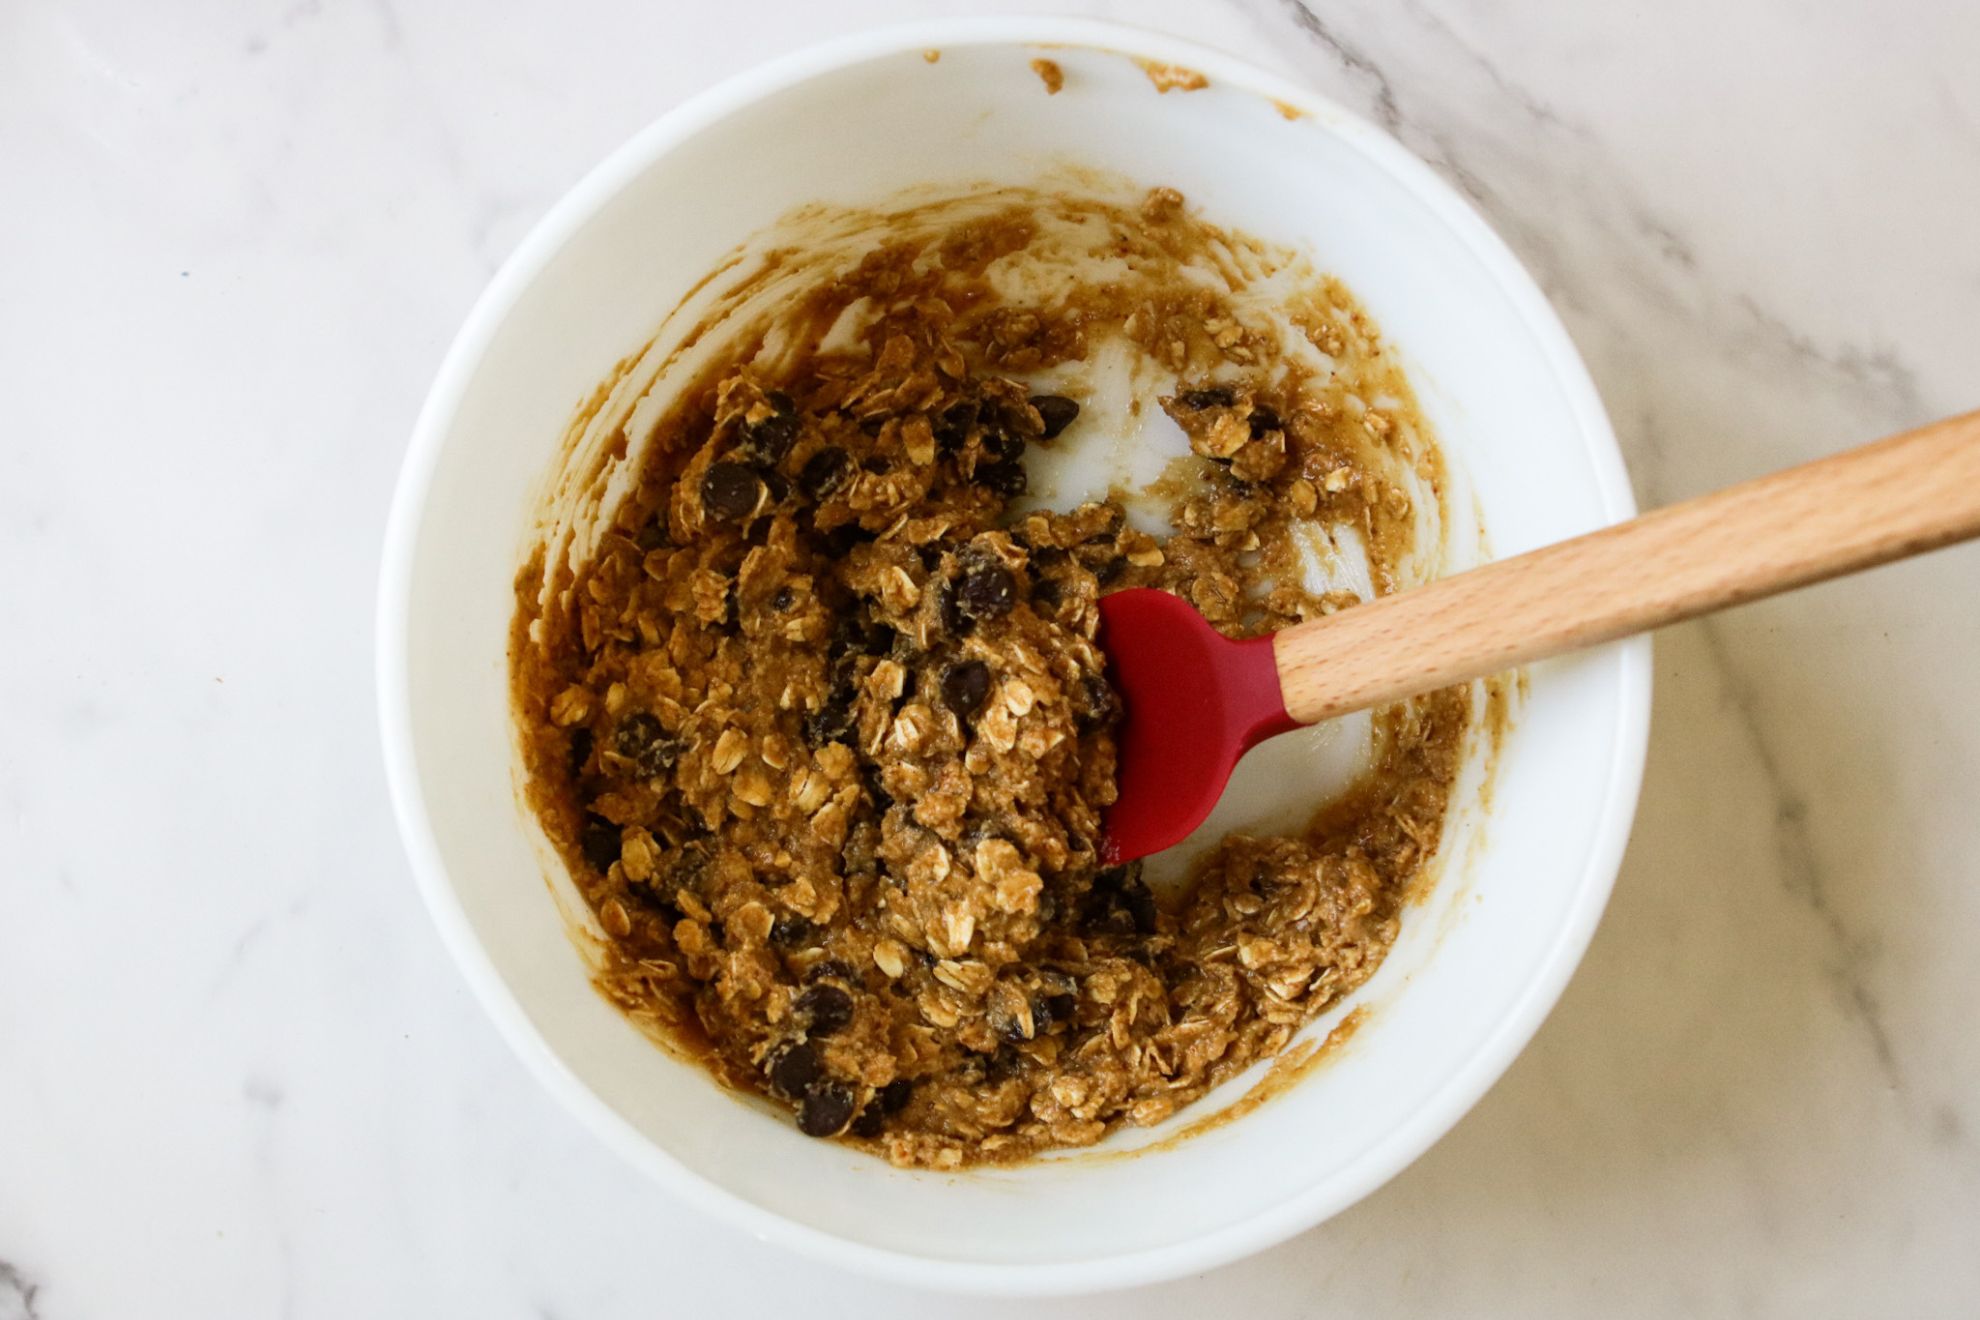 This is an overhead horizontal image of a white bowl on a white marble surface. In the bowl is an oatmeal chocolate chip cookie dough mixed together. A red spatula with a wooden handle is inserting into the dough and leaning against the side of the bowl with the whisk pointing to the right side of the image.